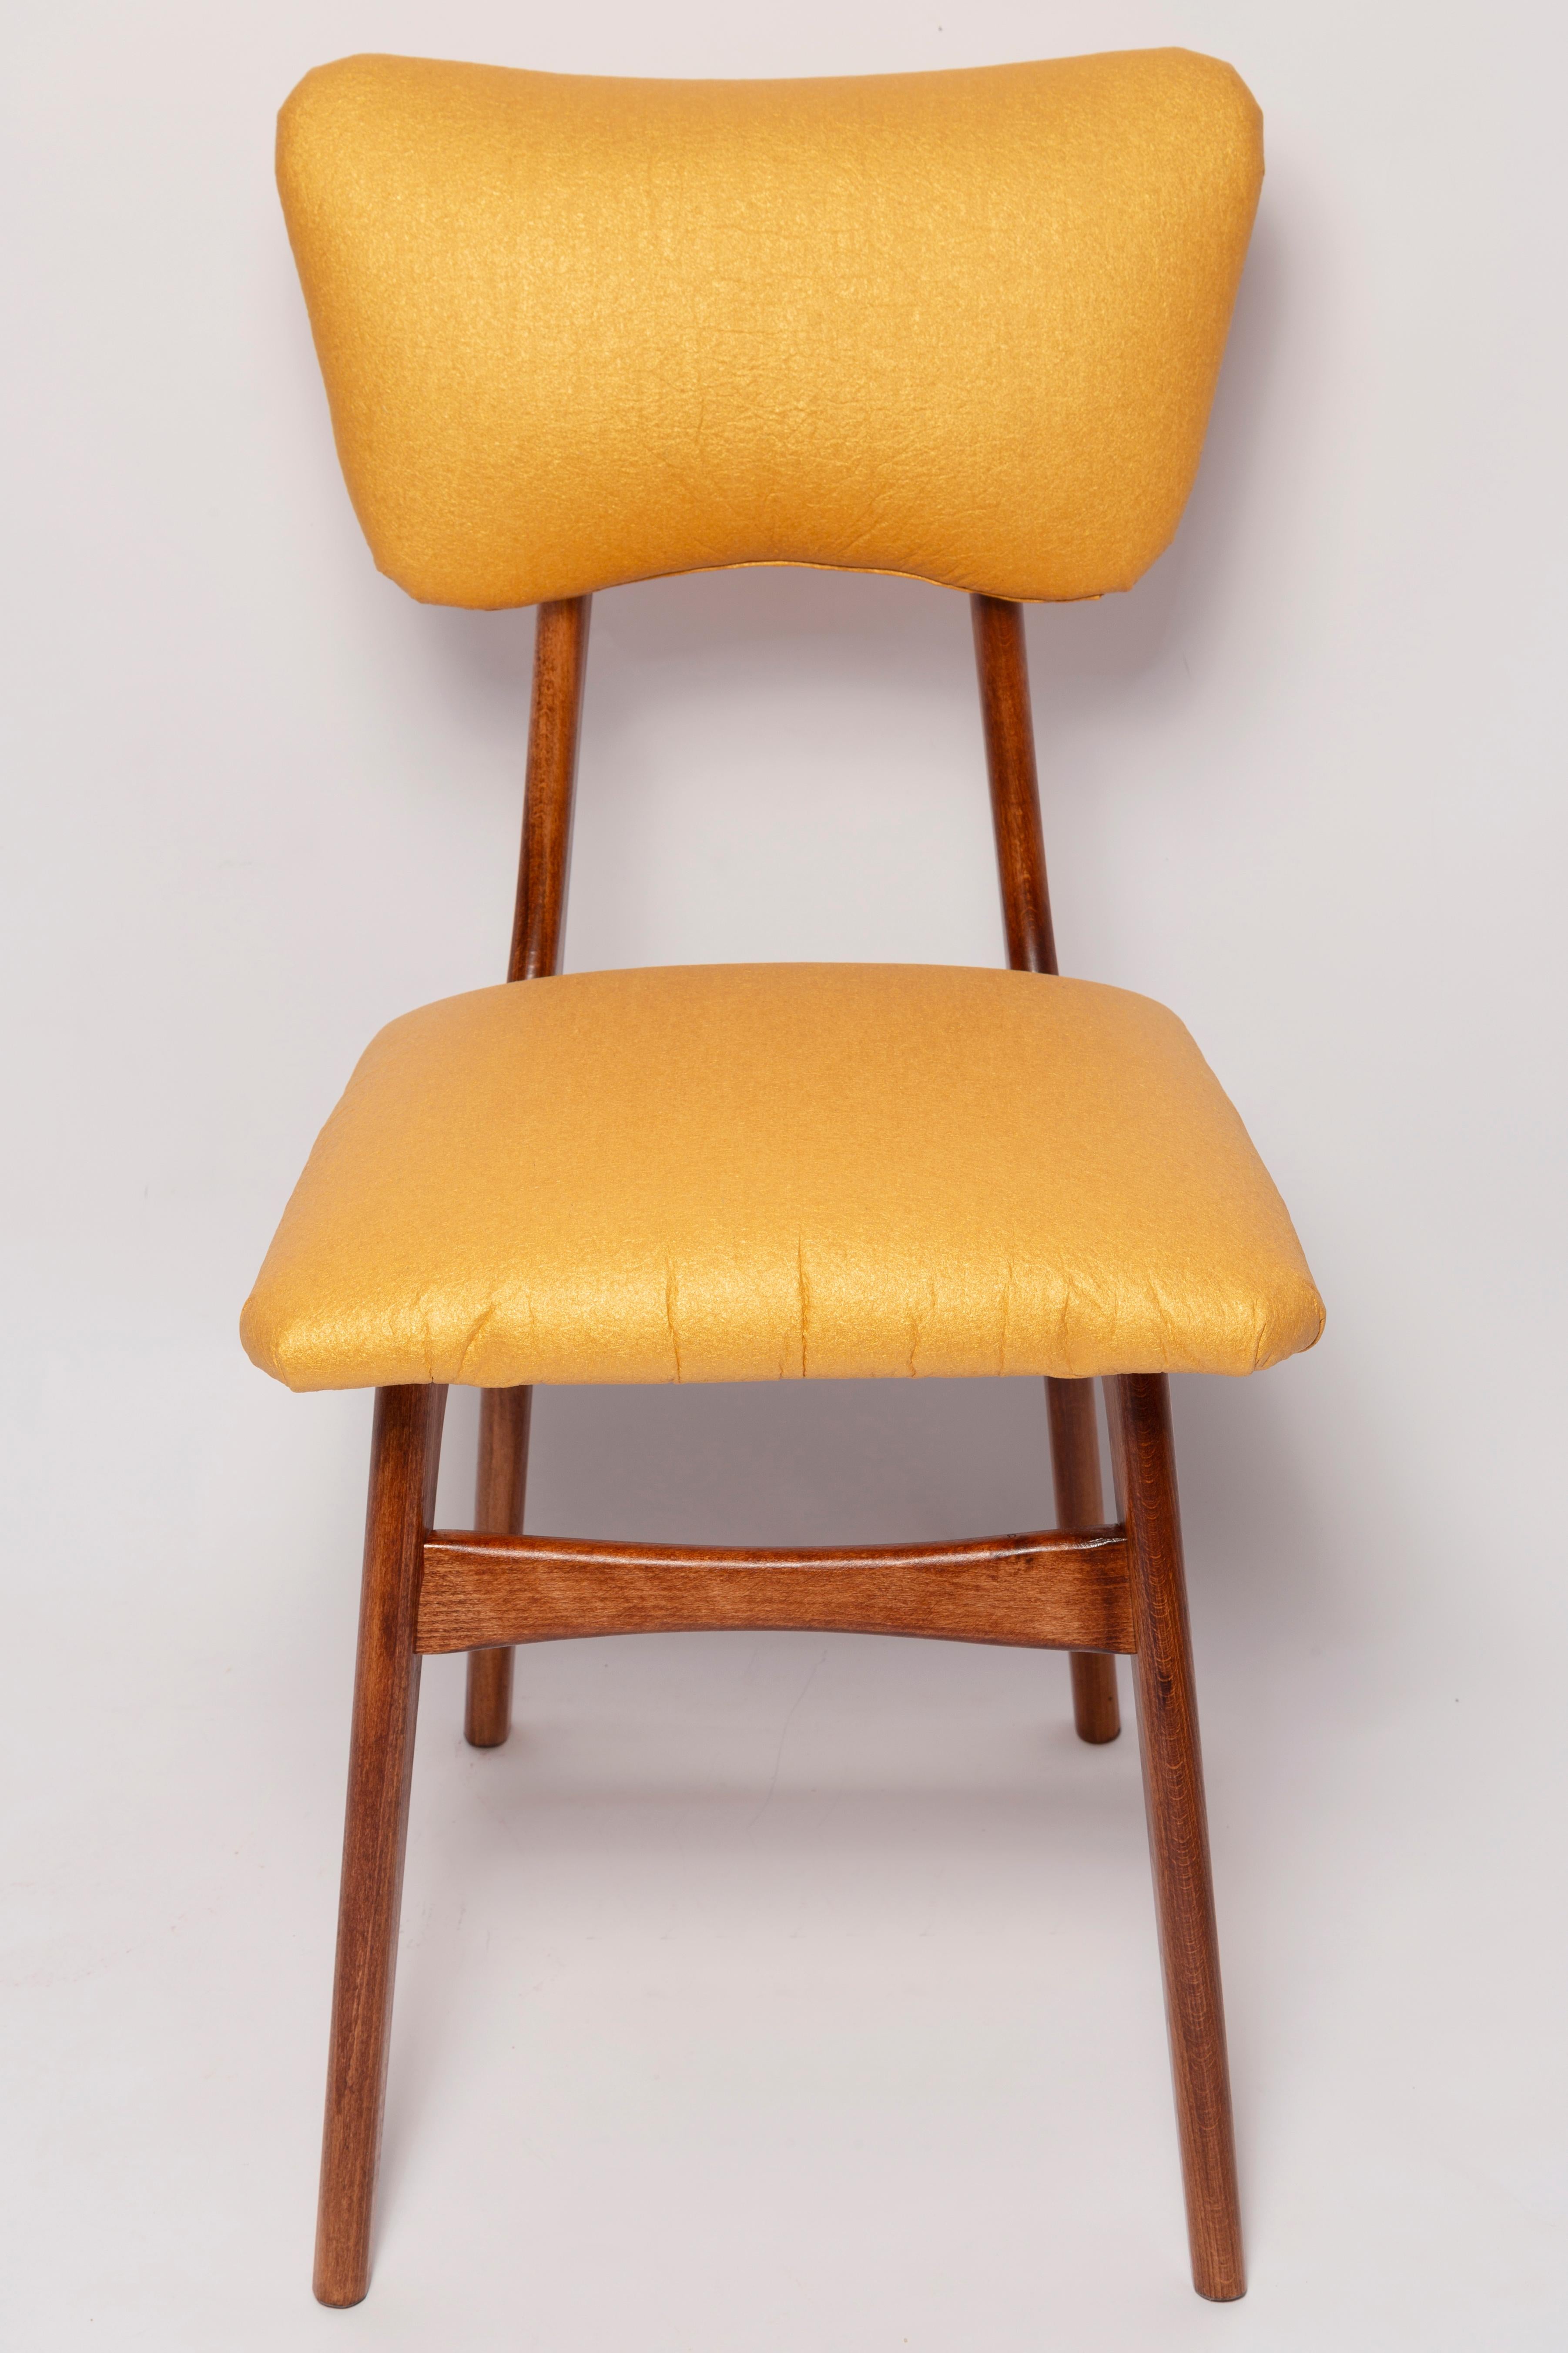 Hand-Crafted Set of Four Mid Century Butterfly Dining Chairs, Pineapple Leather, Europe 1960s For Sale